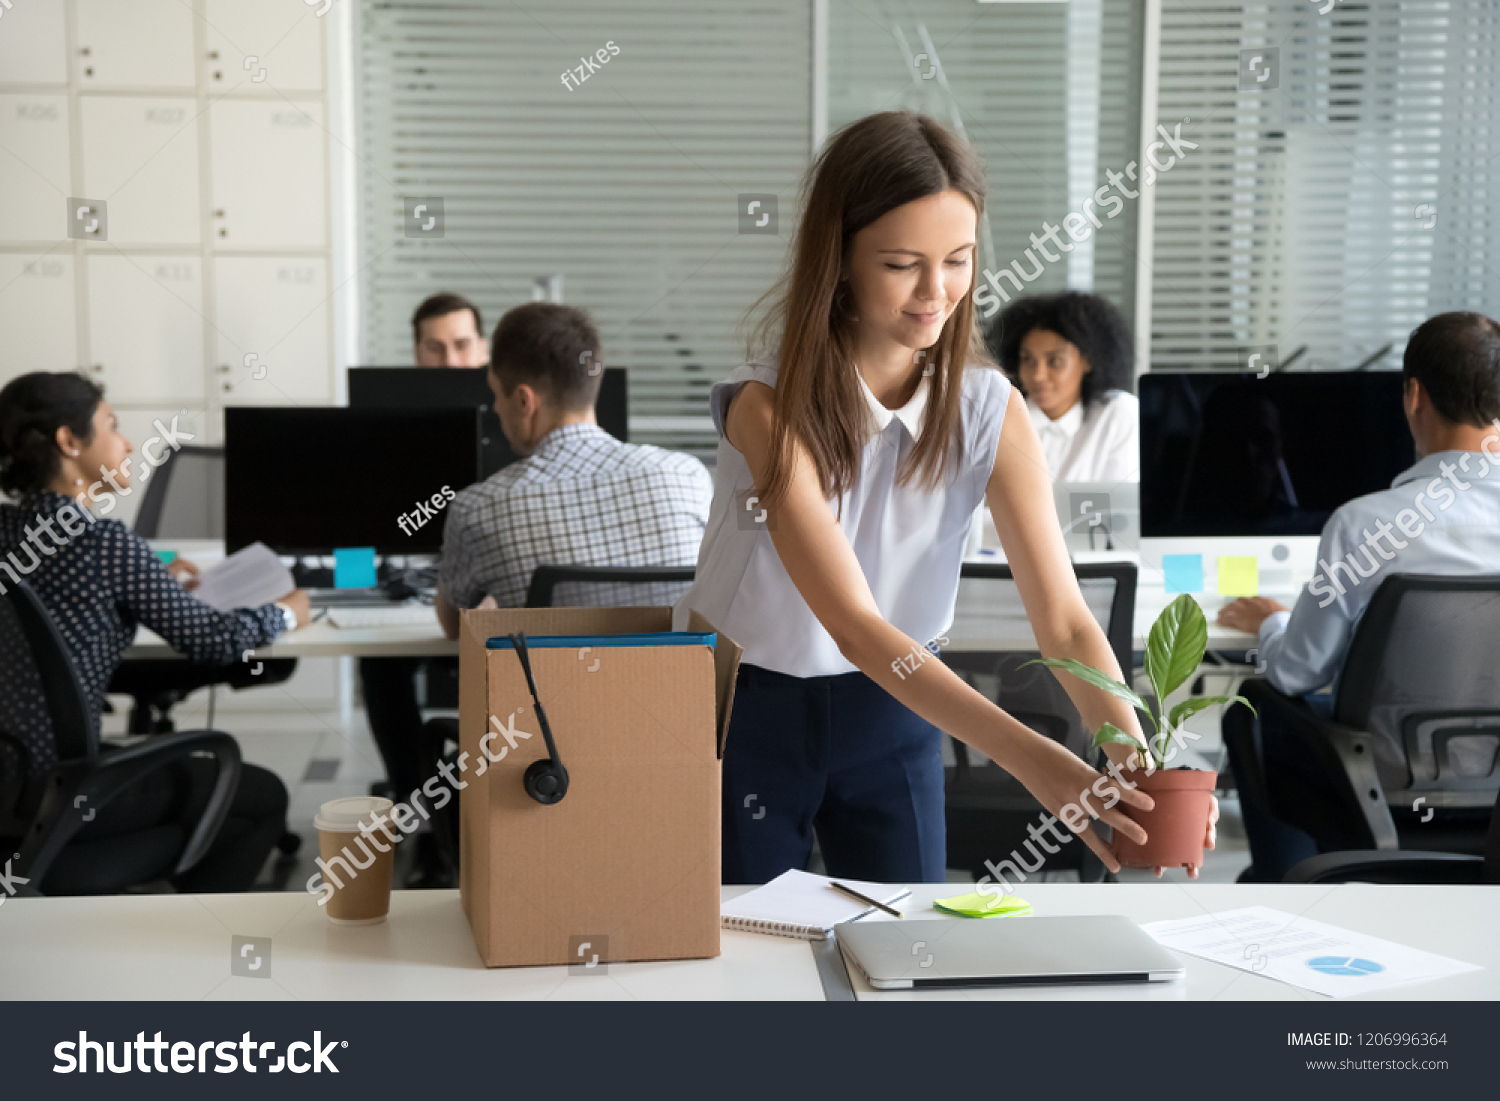 Smiling hired female company employee unpacking box with personal belongings at workplace on first working day in shared office, happy intern or newcomer got new job excited to start work concept #1206996364